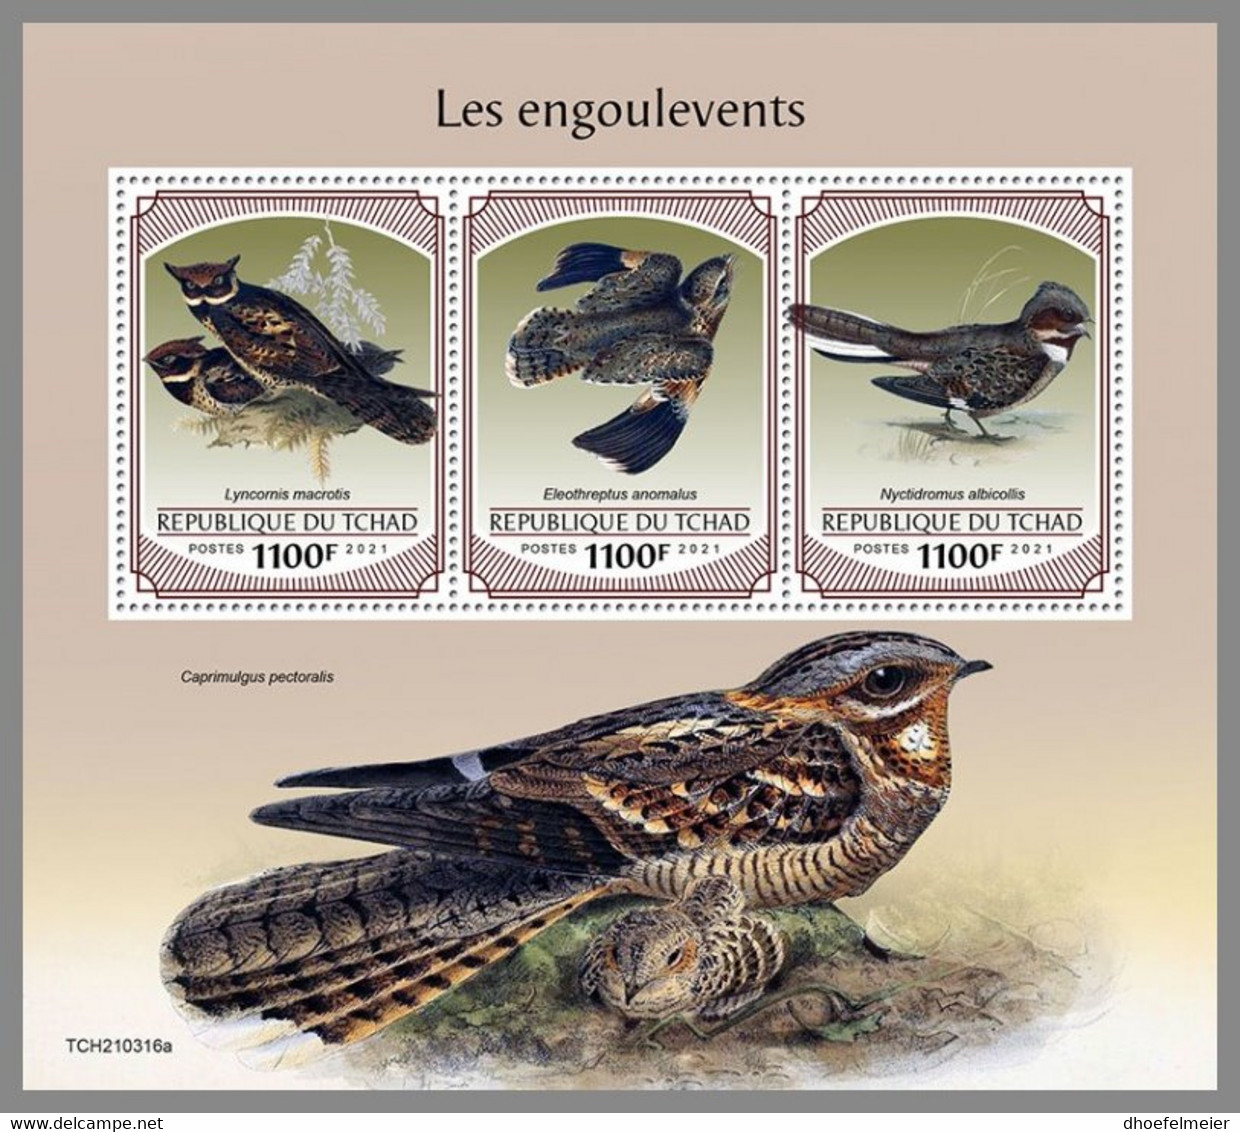 CHAD 2021 MNH Nightjars Nachtschwalben Engoulevents M/S - IMPERFORATED - DHQ2144 - Hirondelles